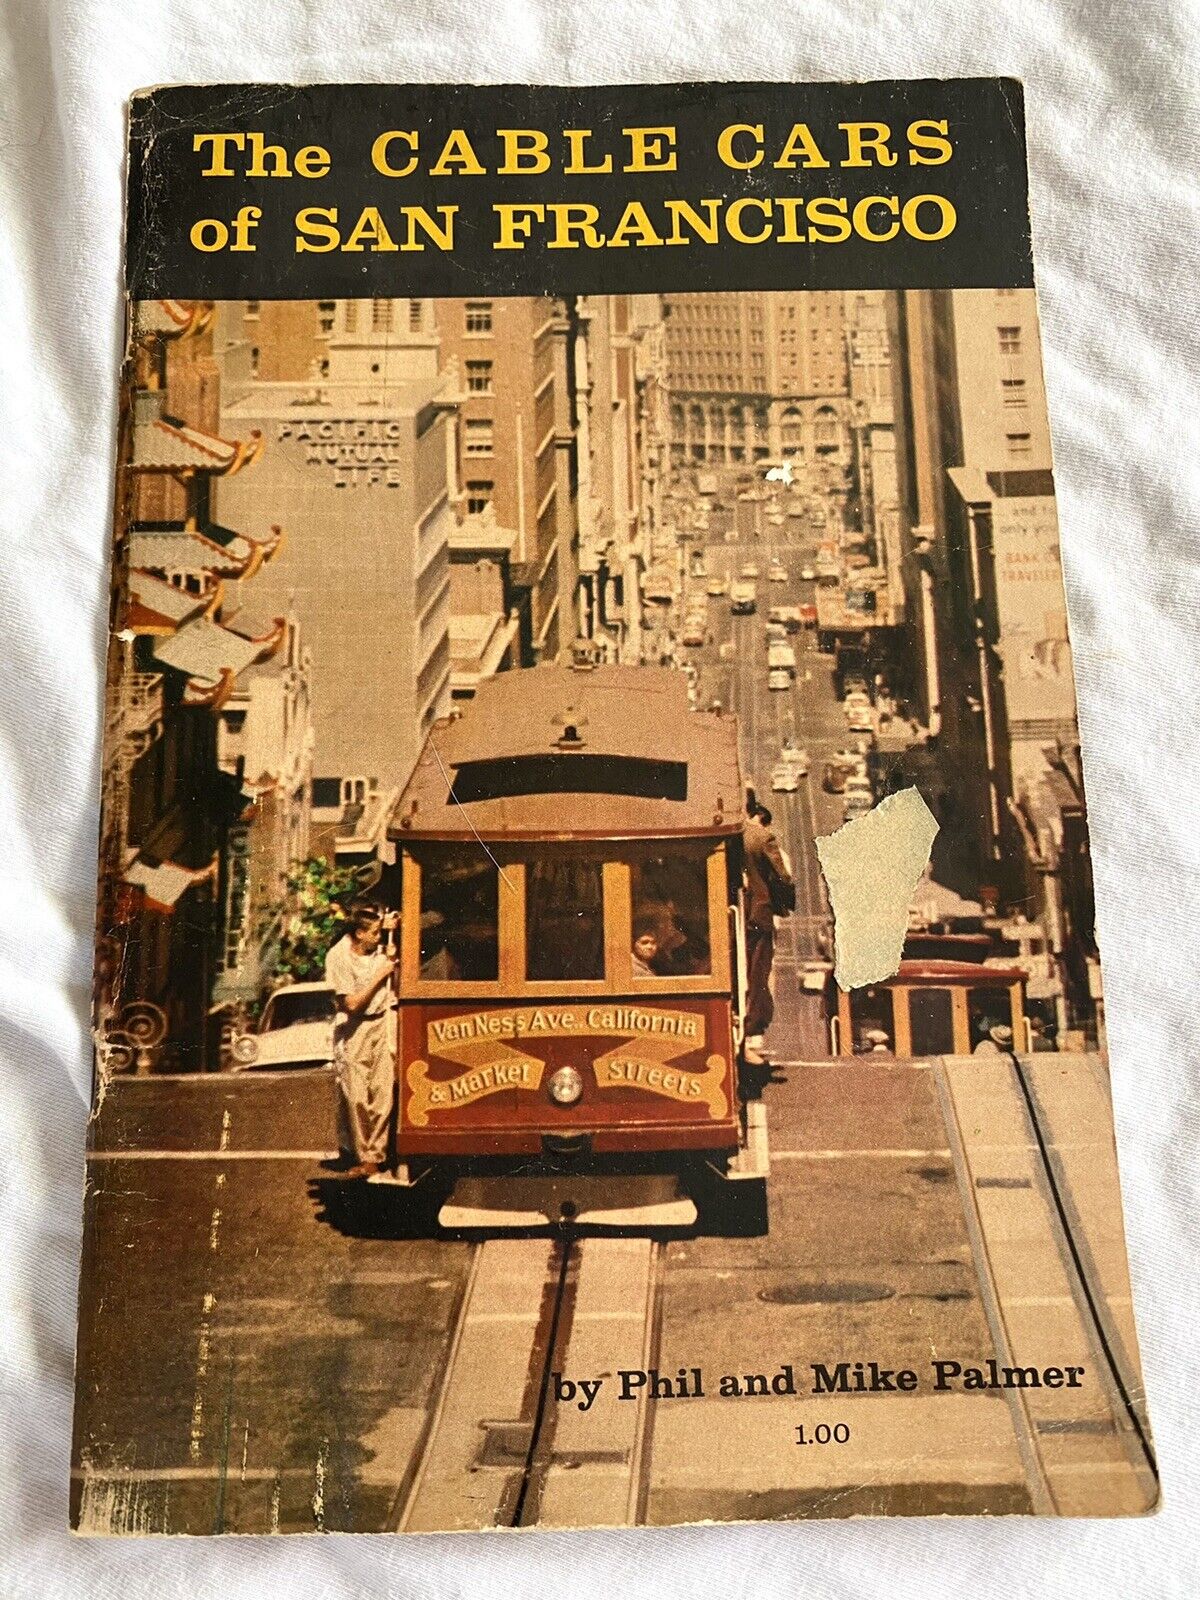 The Cable Cars Of San Francisco 1968 Historical Booklet by Phil & Mike Palmer  